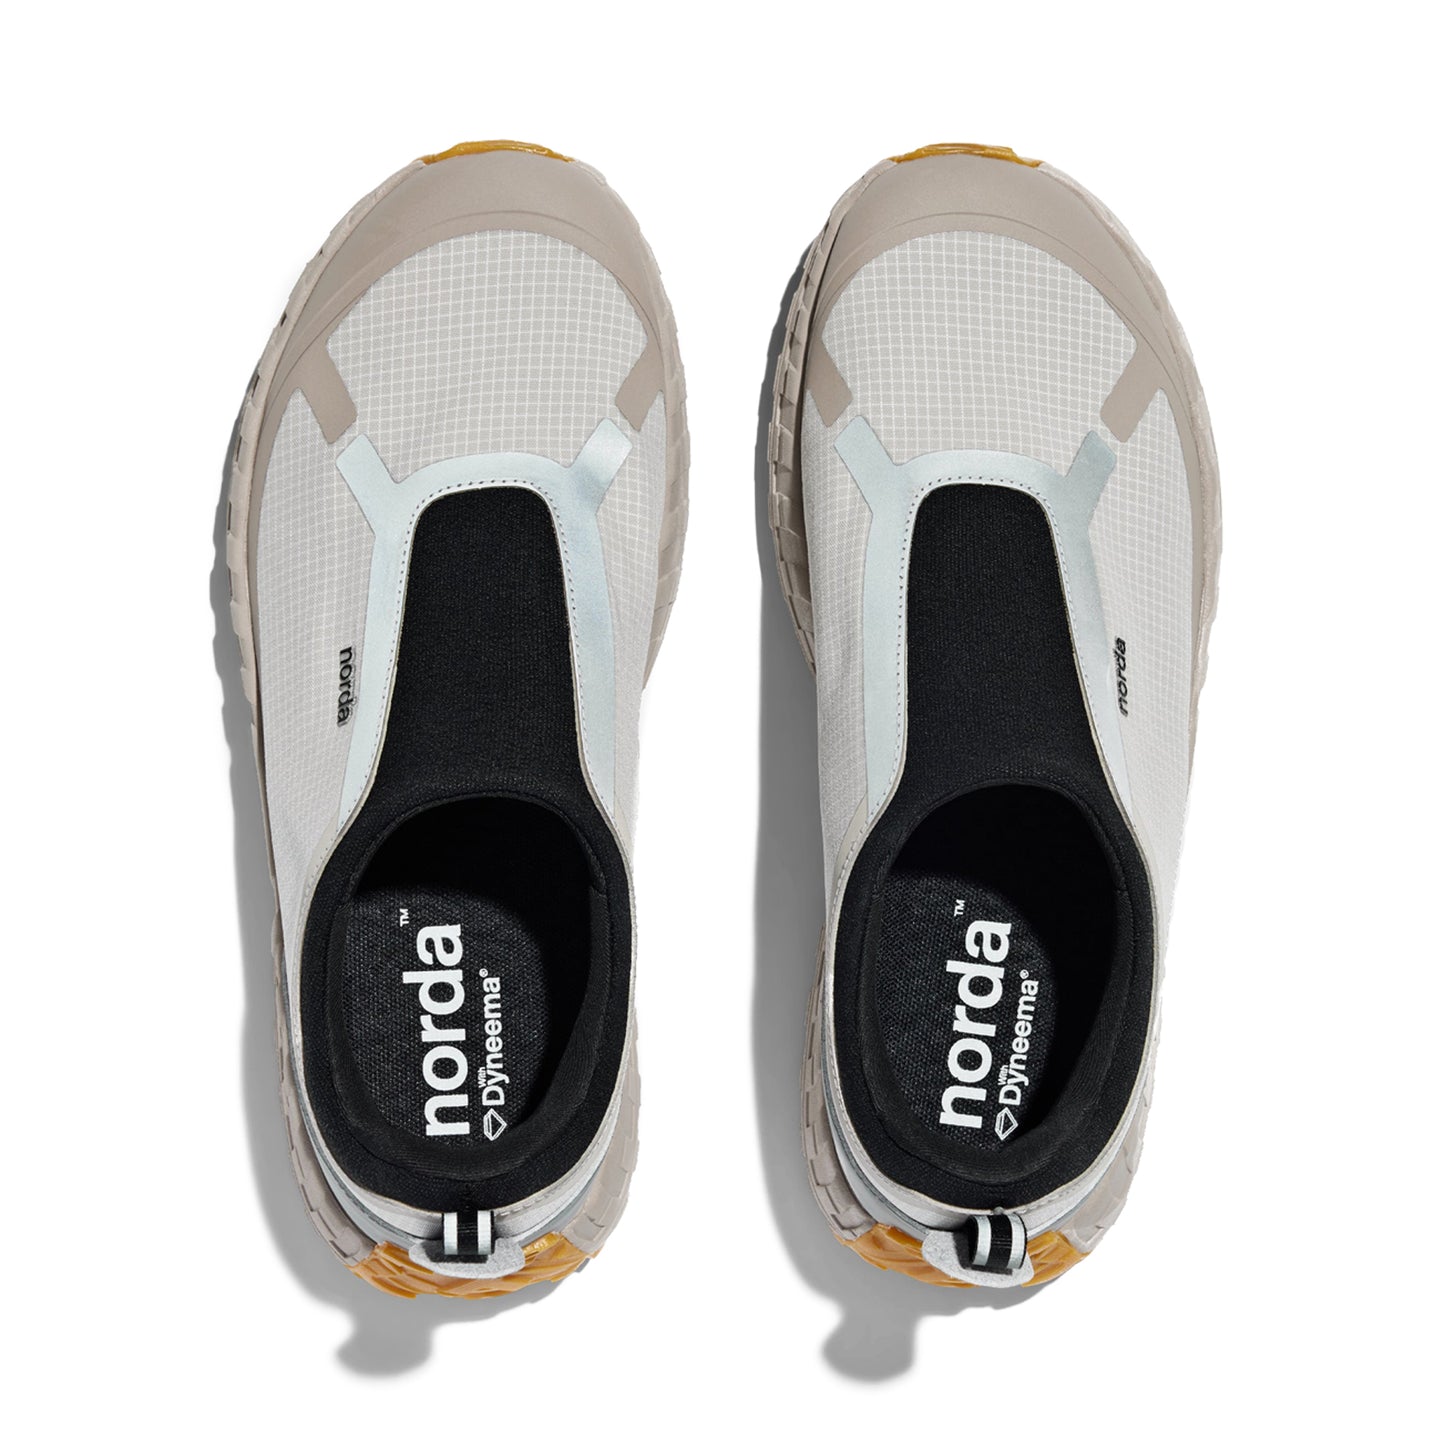 Norda 003 Laceless Trail Shoes